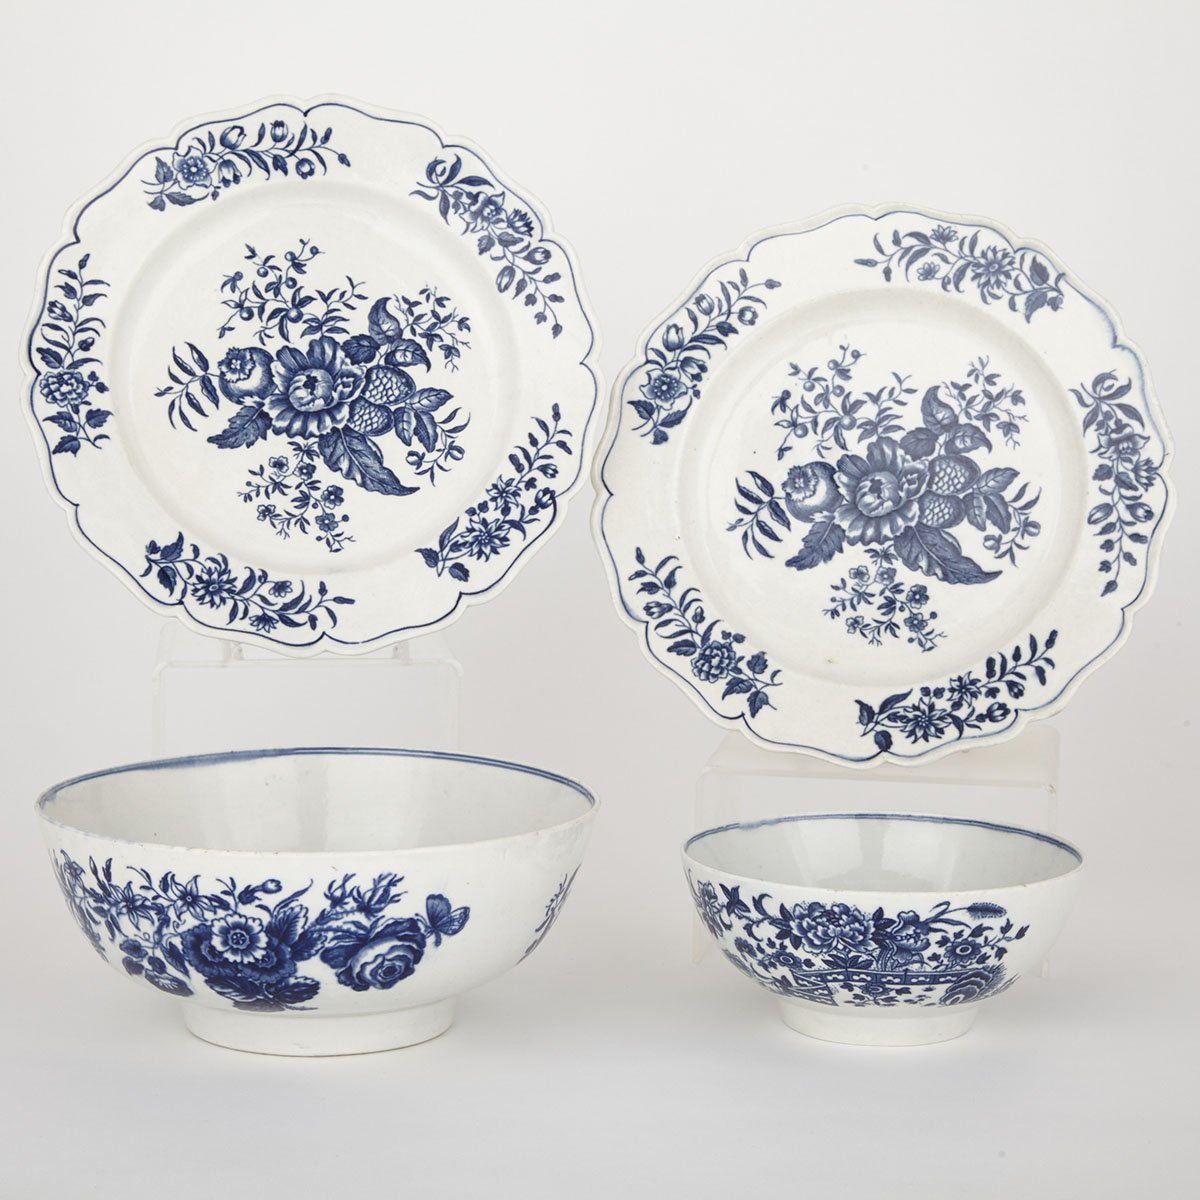 Worcester ‘Three Flowers’ Bowl, ‘Fence’ Pattern Bowl and Two ‘Pine Cone’ Pattern Plates, c.1770-85